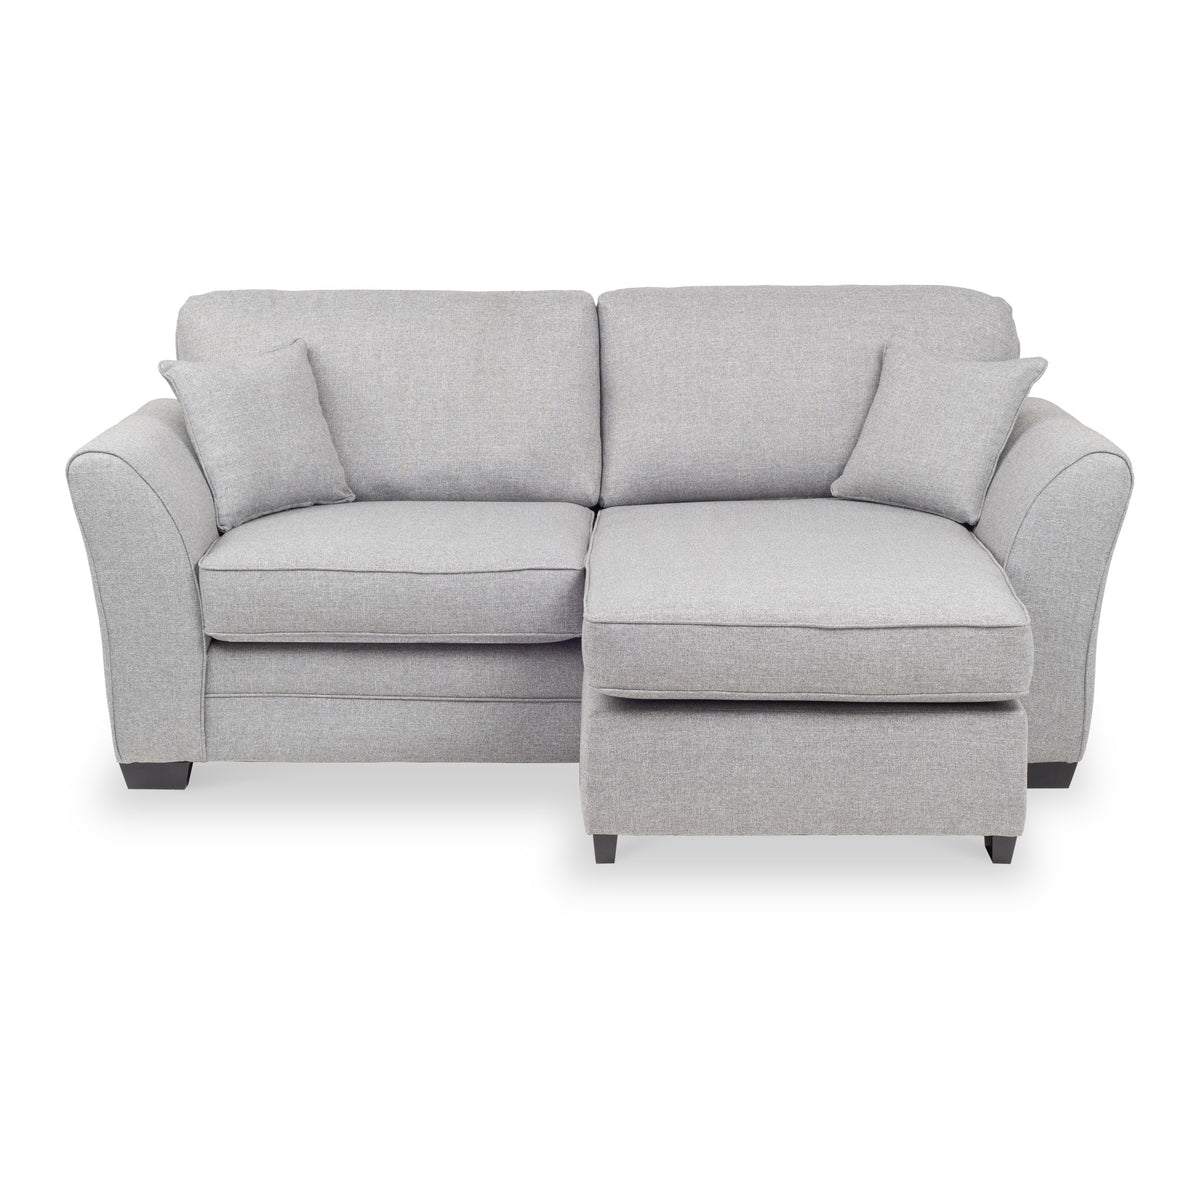 St Ives Chaise Sofa in Silver by Roseland Furniture